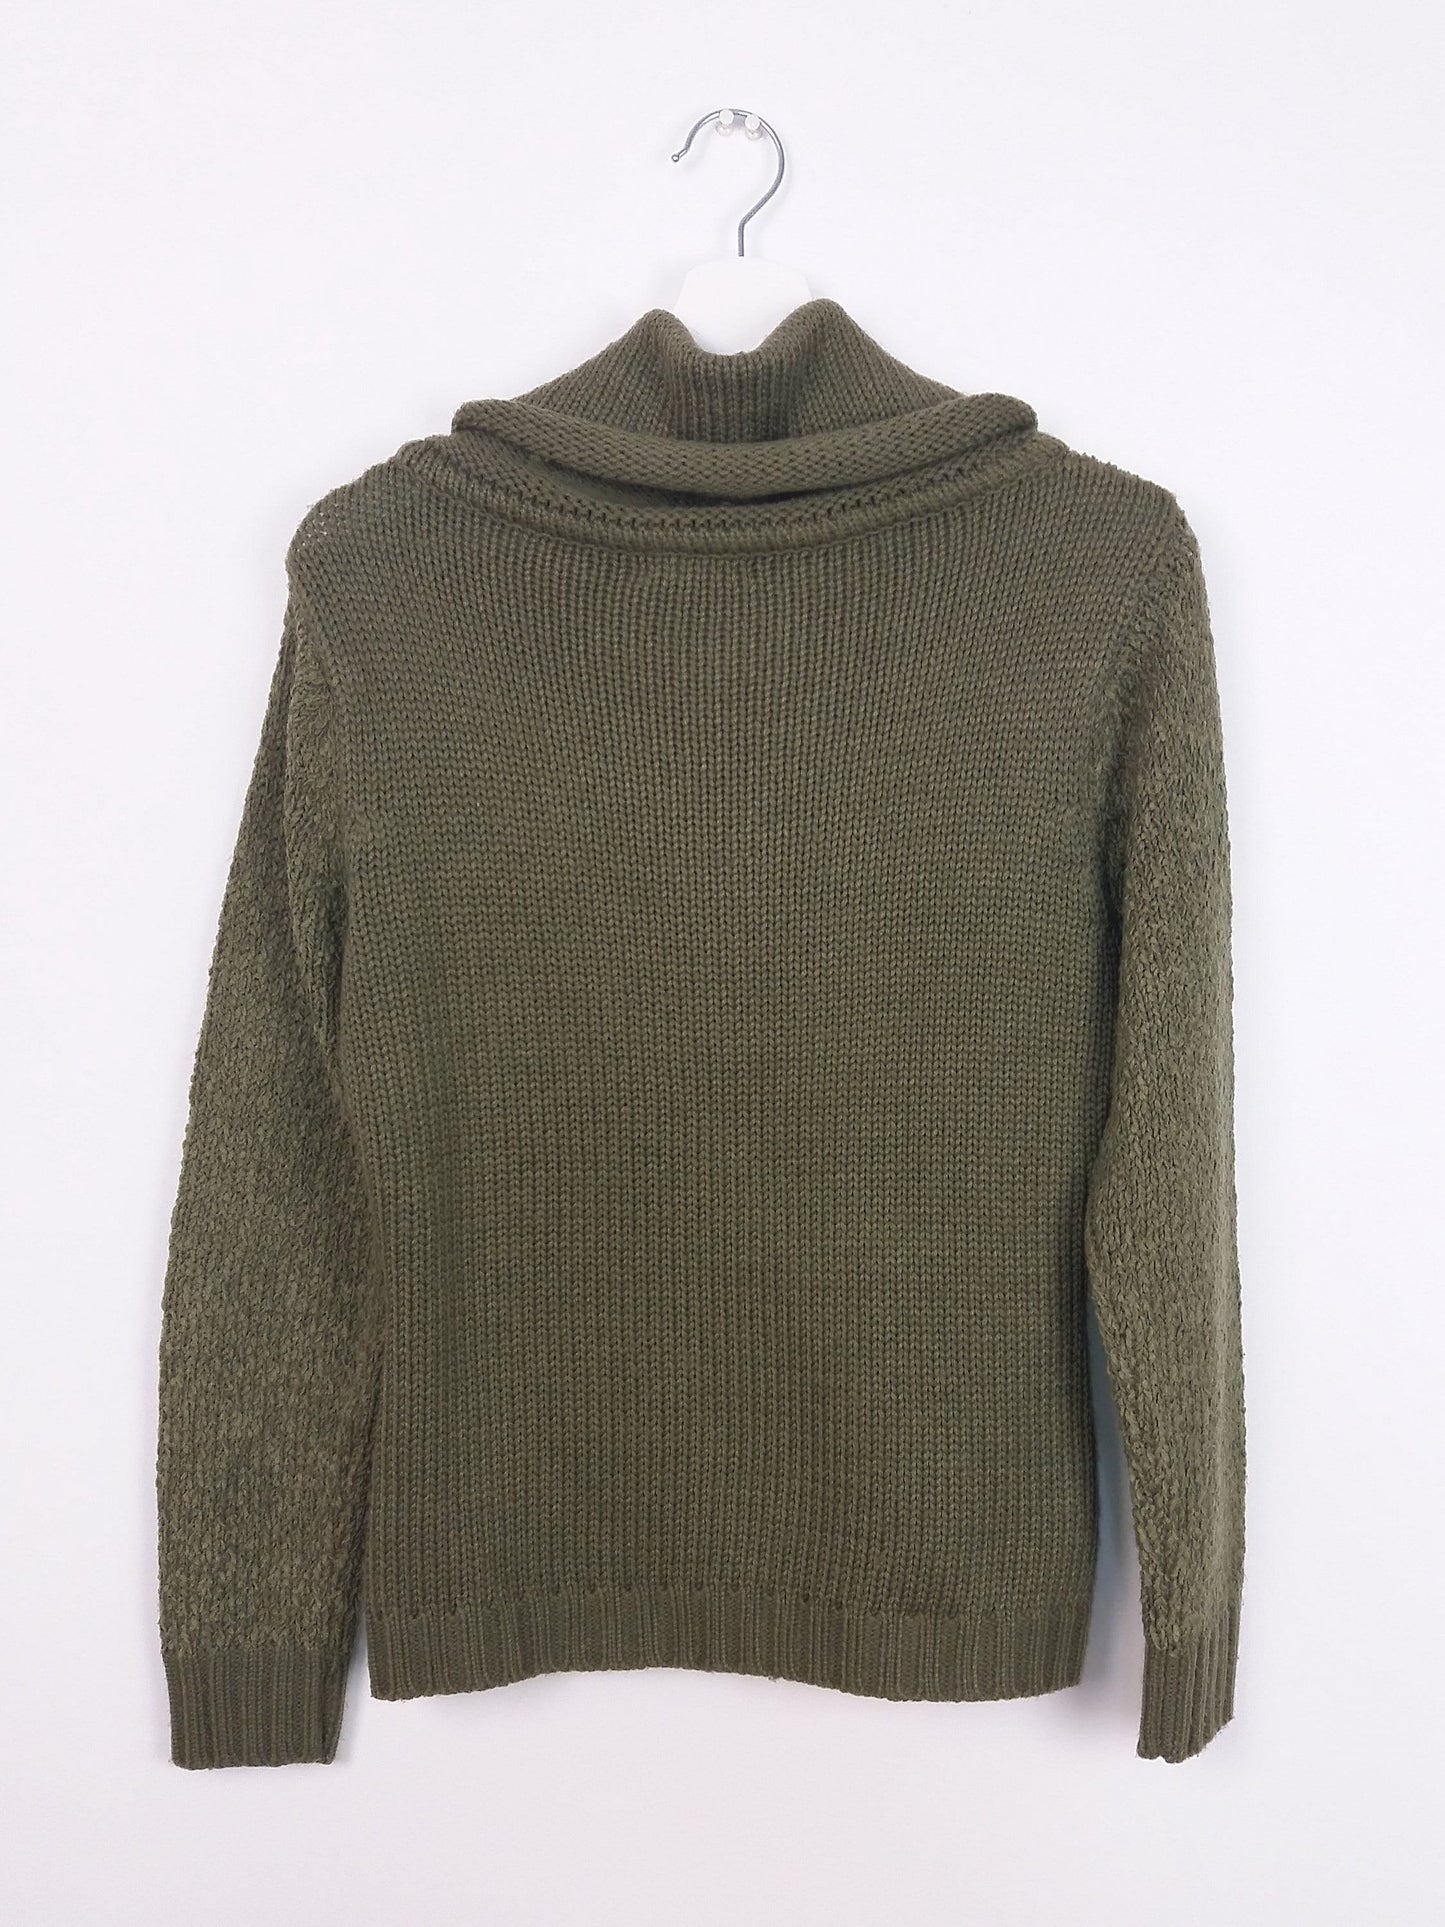 Cable Knit Large Cowl Neck Sweater Olive Green ~ size S-M